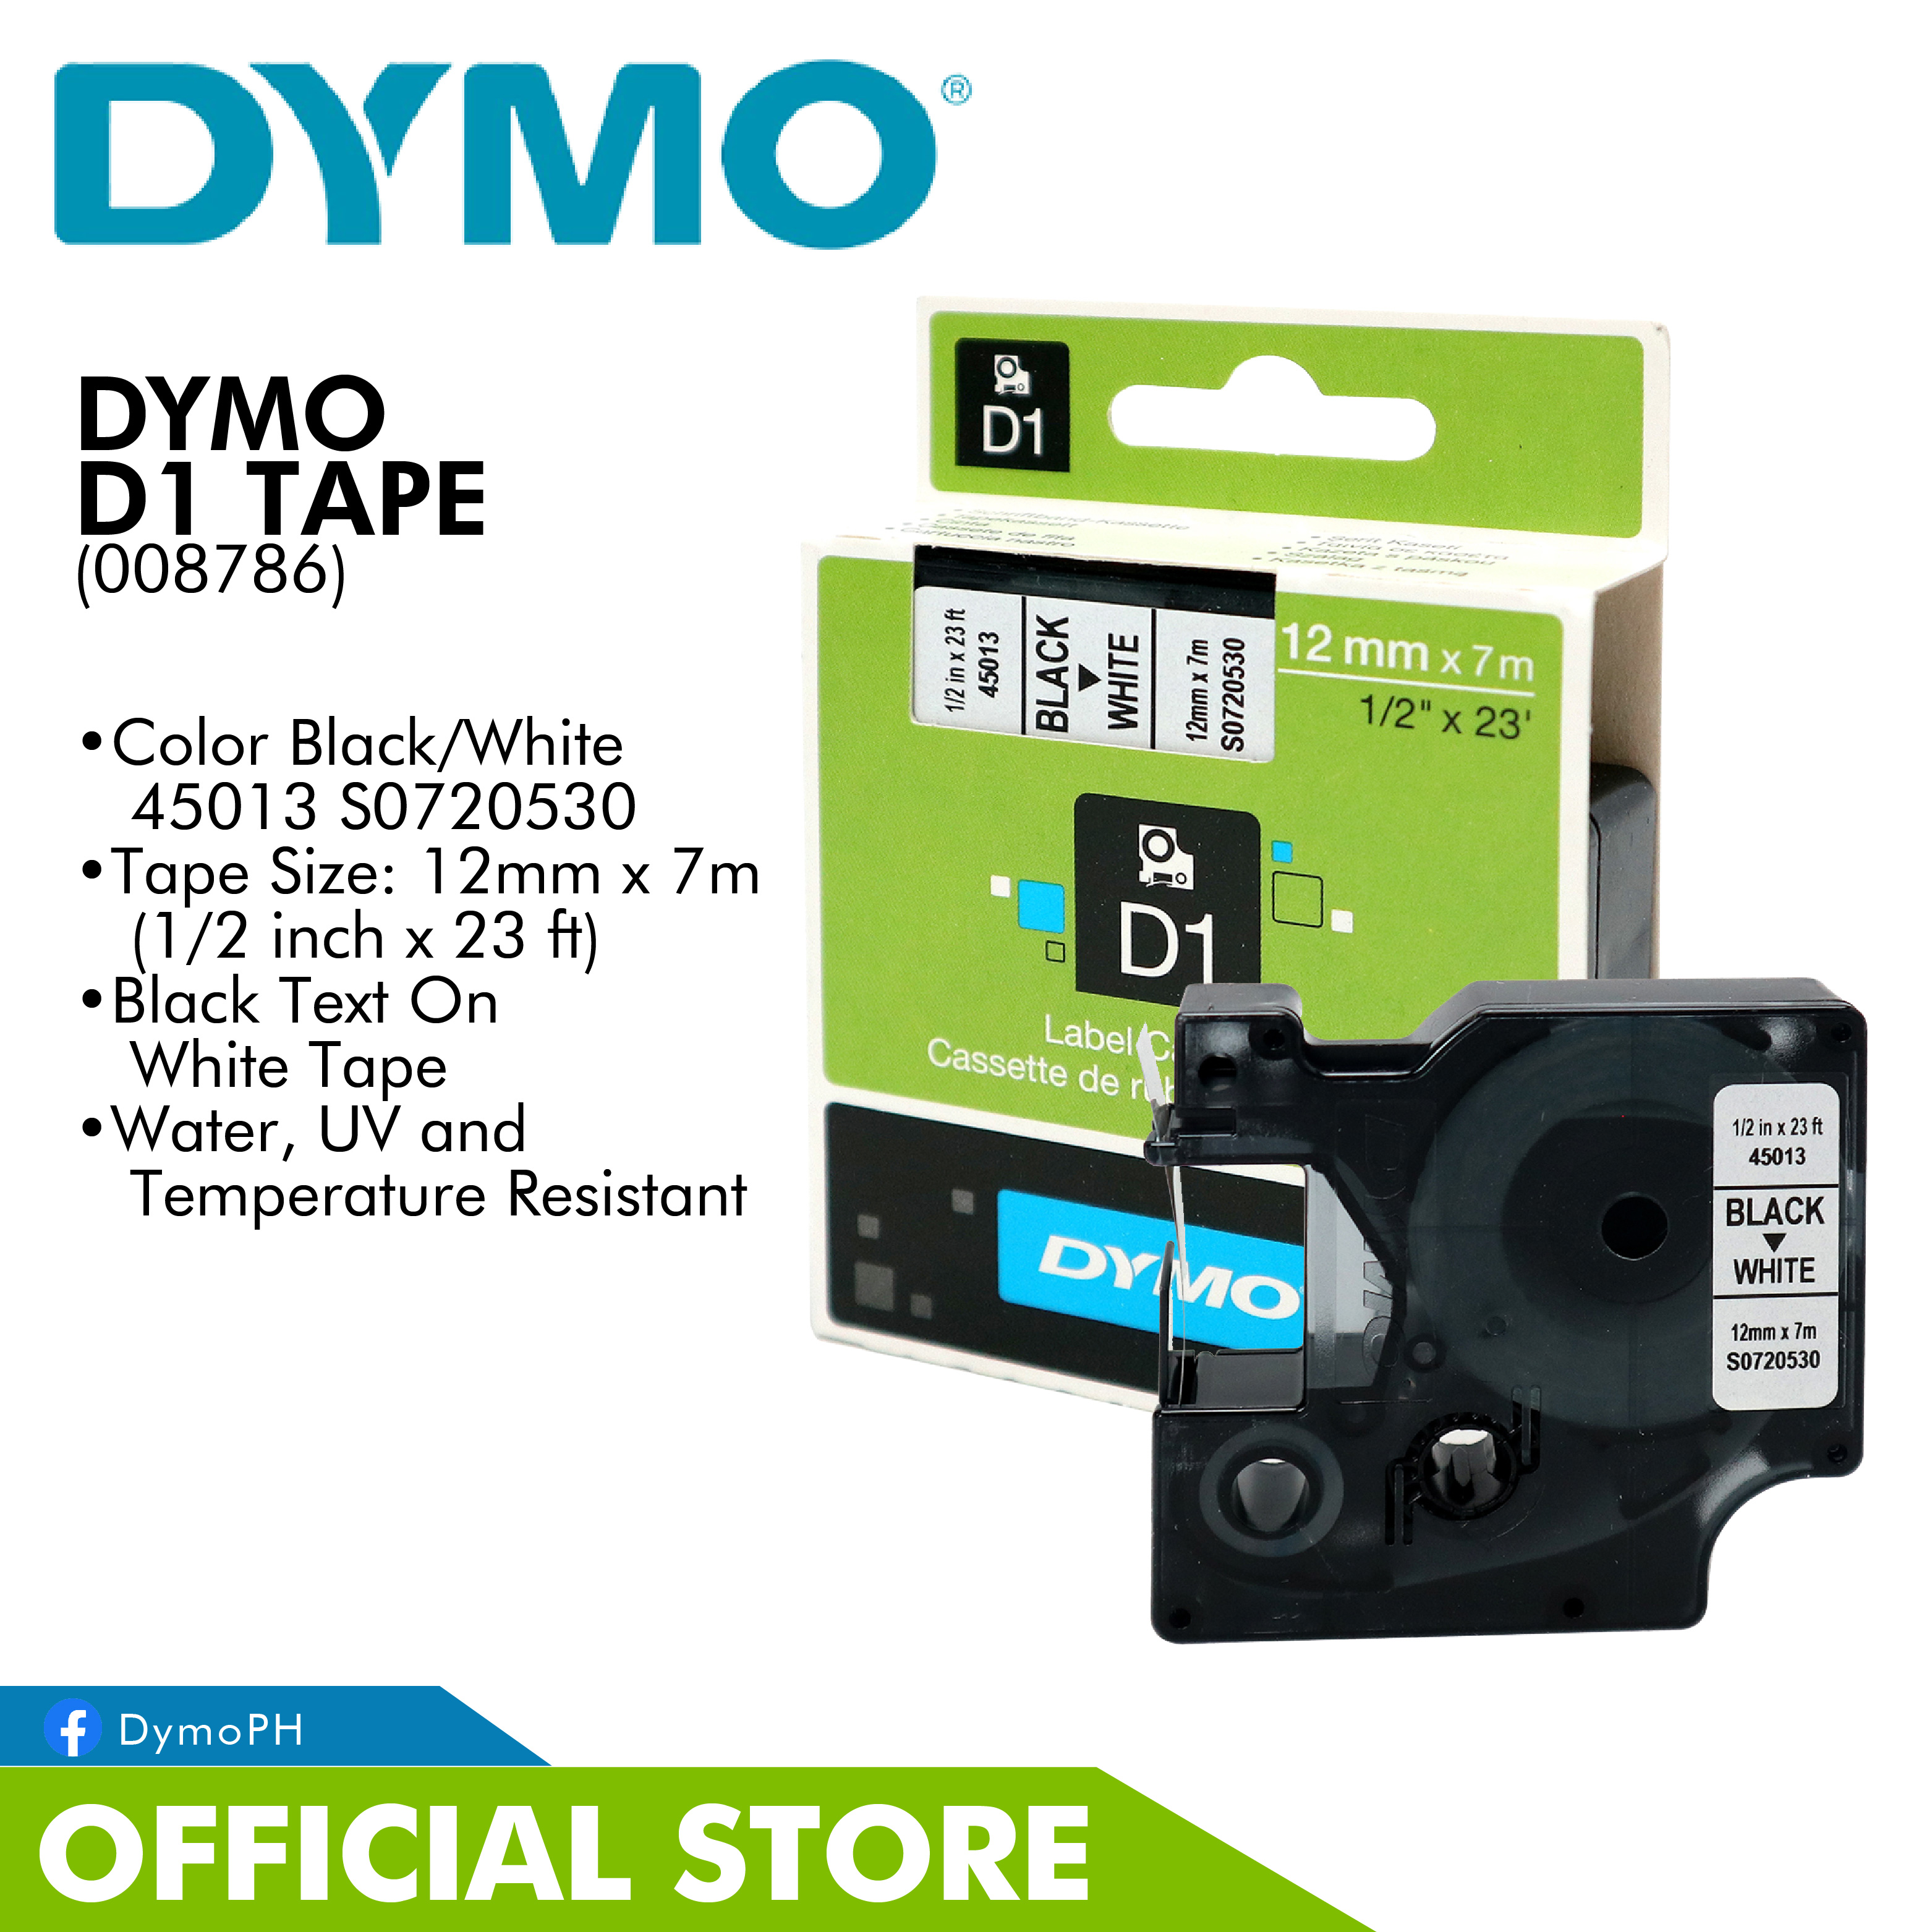 DYMO Standard D1 Labeling Tape for LabelManager Label Makers Red print on  White tape 1/2'' W x 23' L 1 cartridge 45015